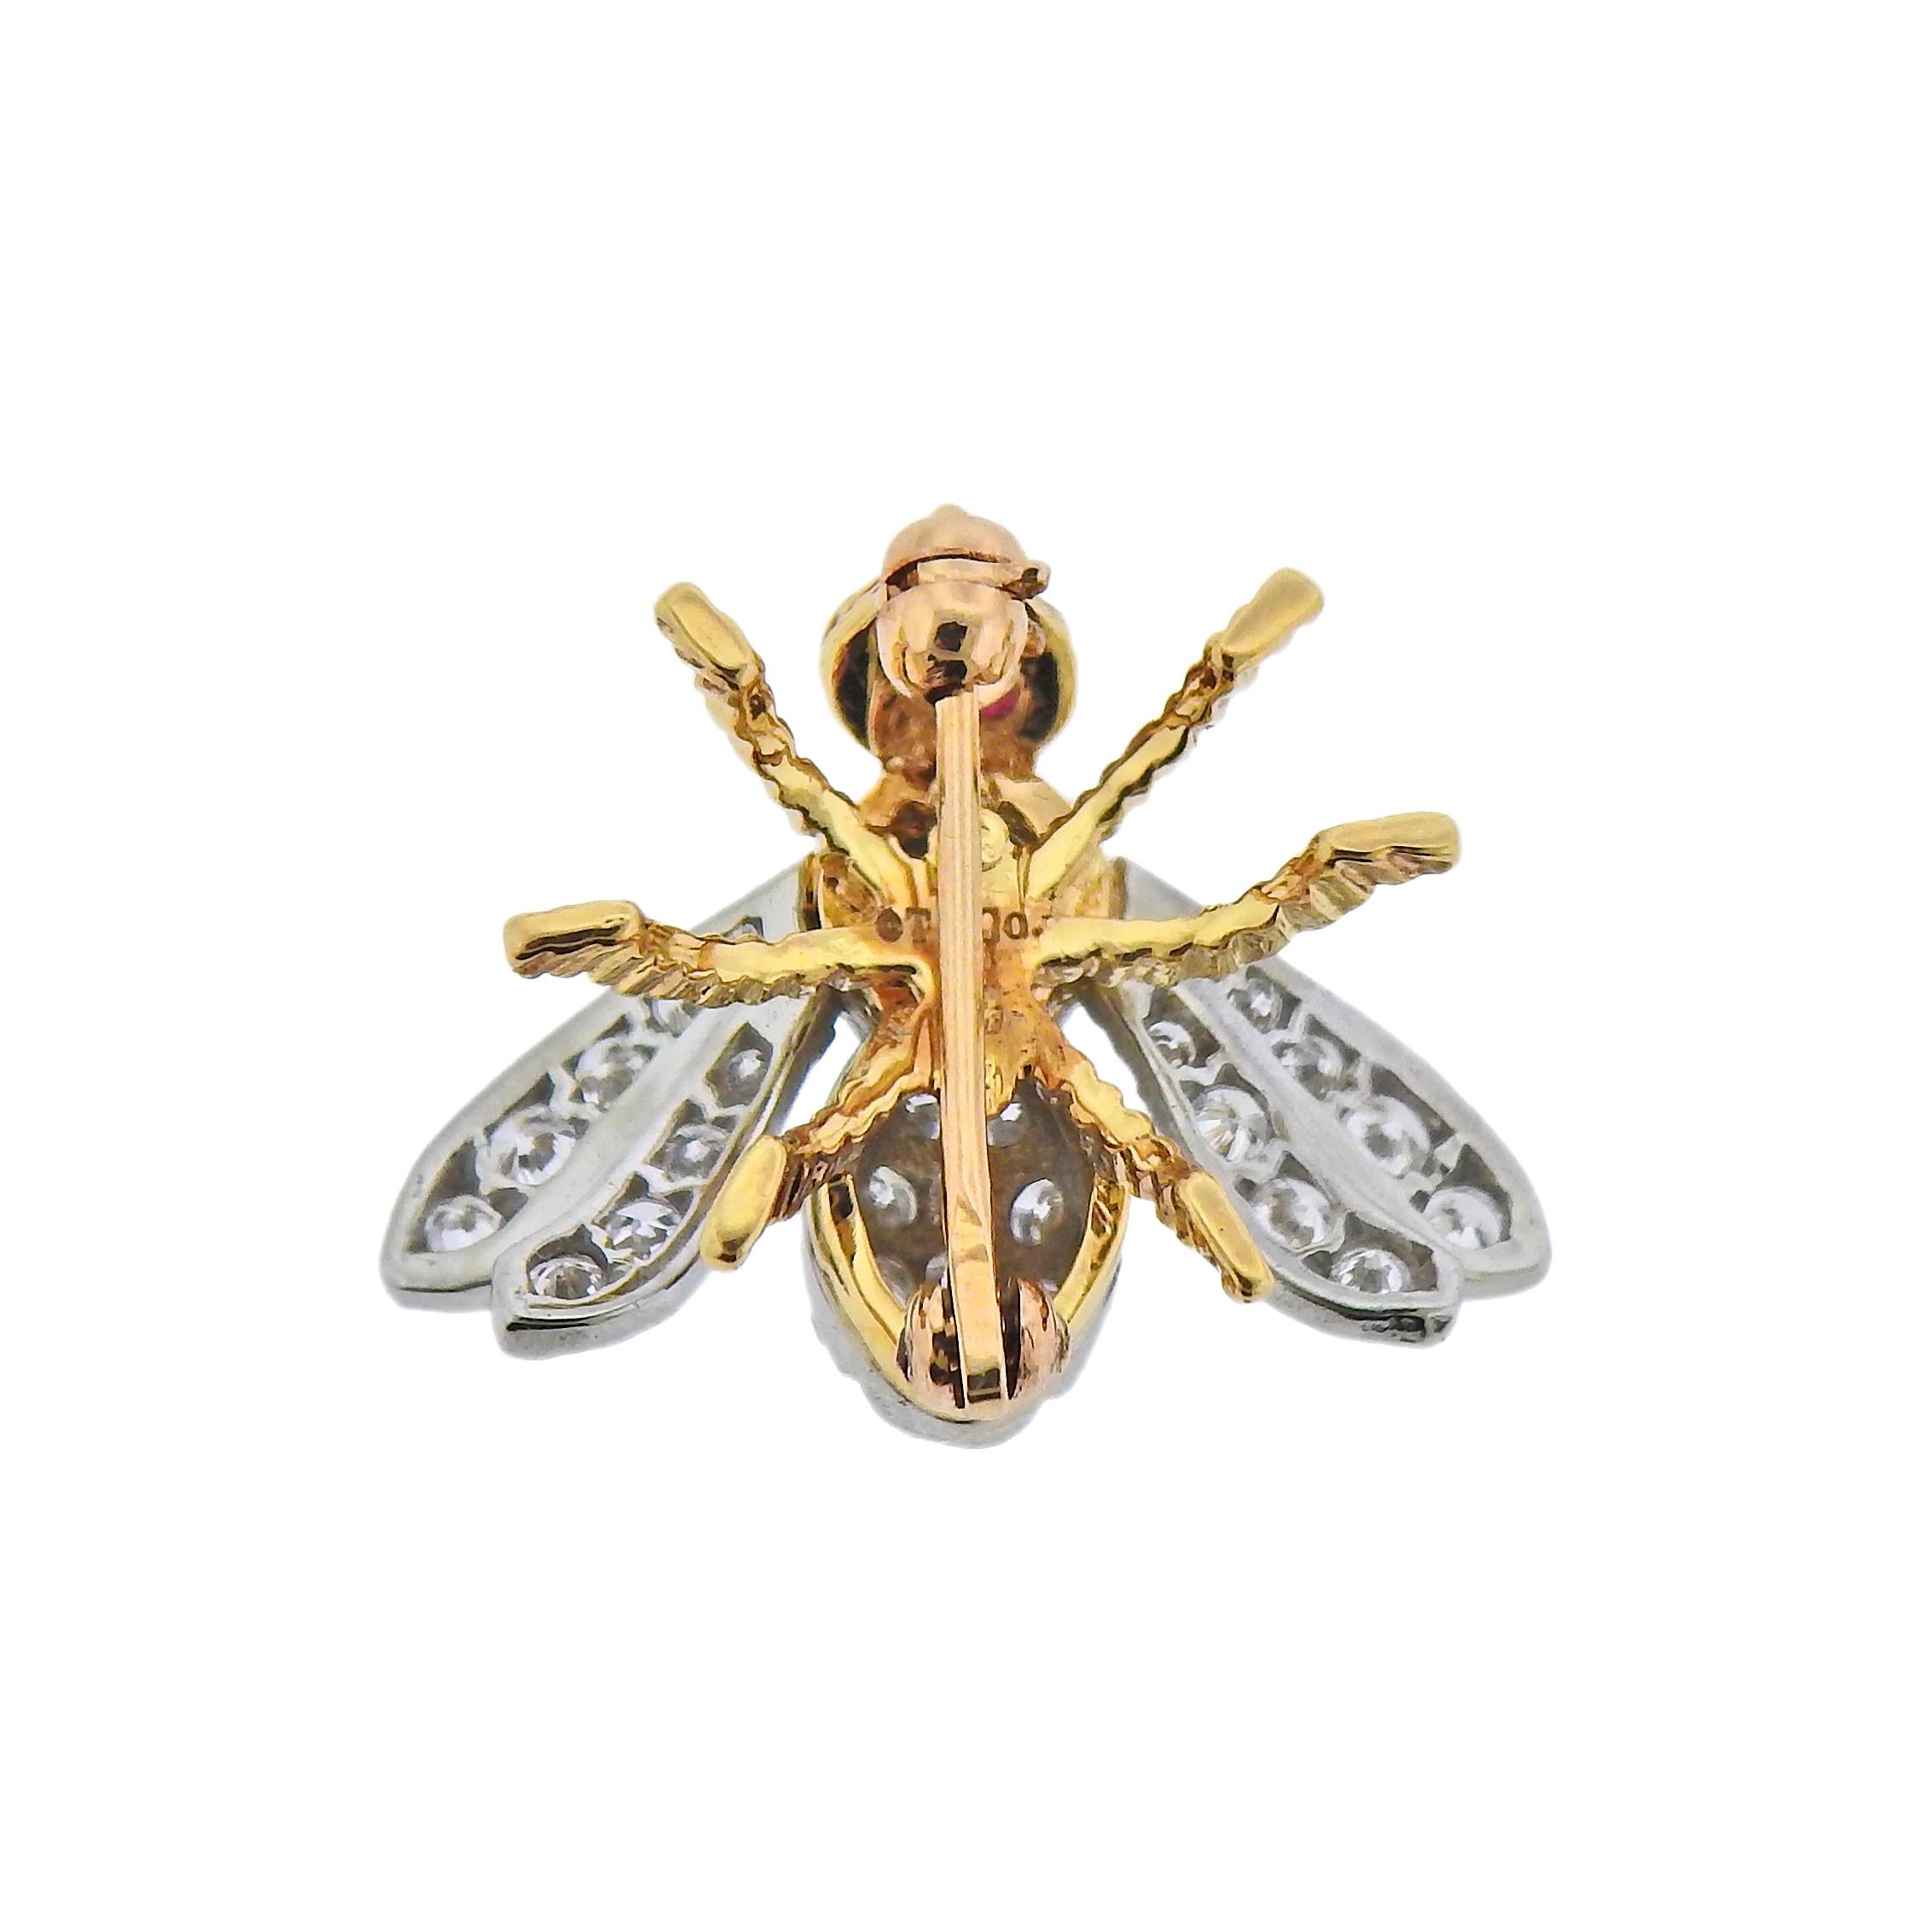 Tiffany & Co 18k gold bee brooch, with approx. 0.60cts in G/VS diamonds and ruby eyes. Brooch is 17mm x 20mm. Weight - 3.2 grams. Marked: Tiffany & Co, 750. 